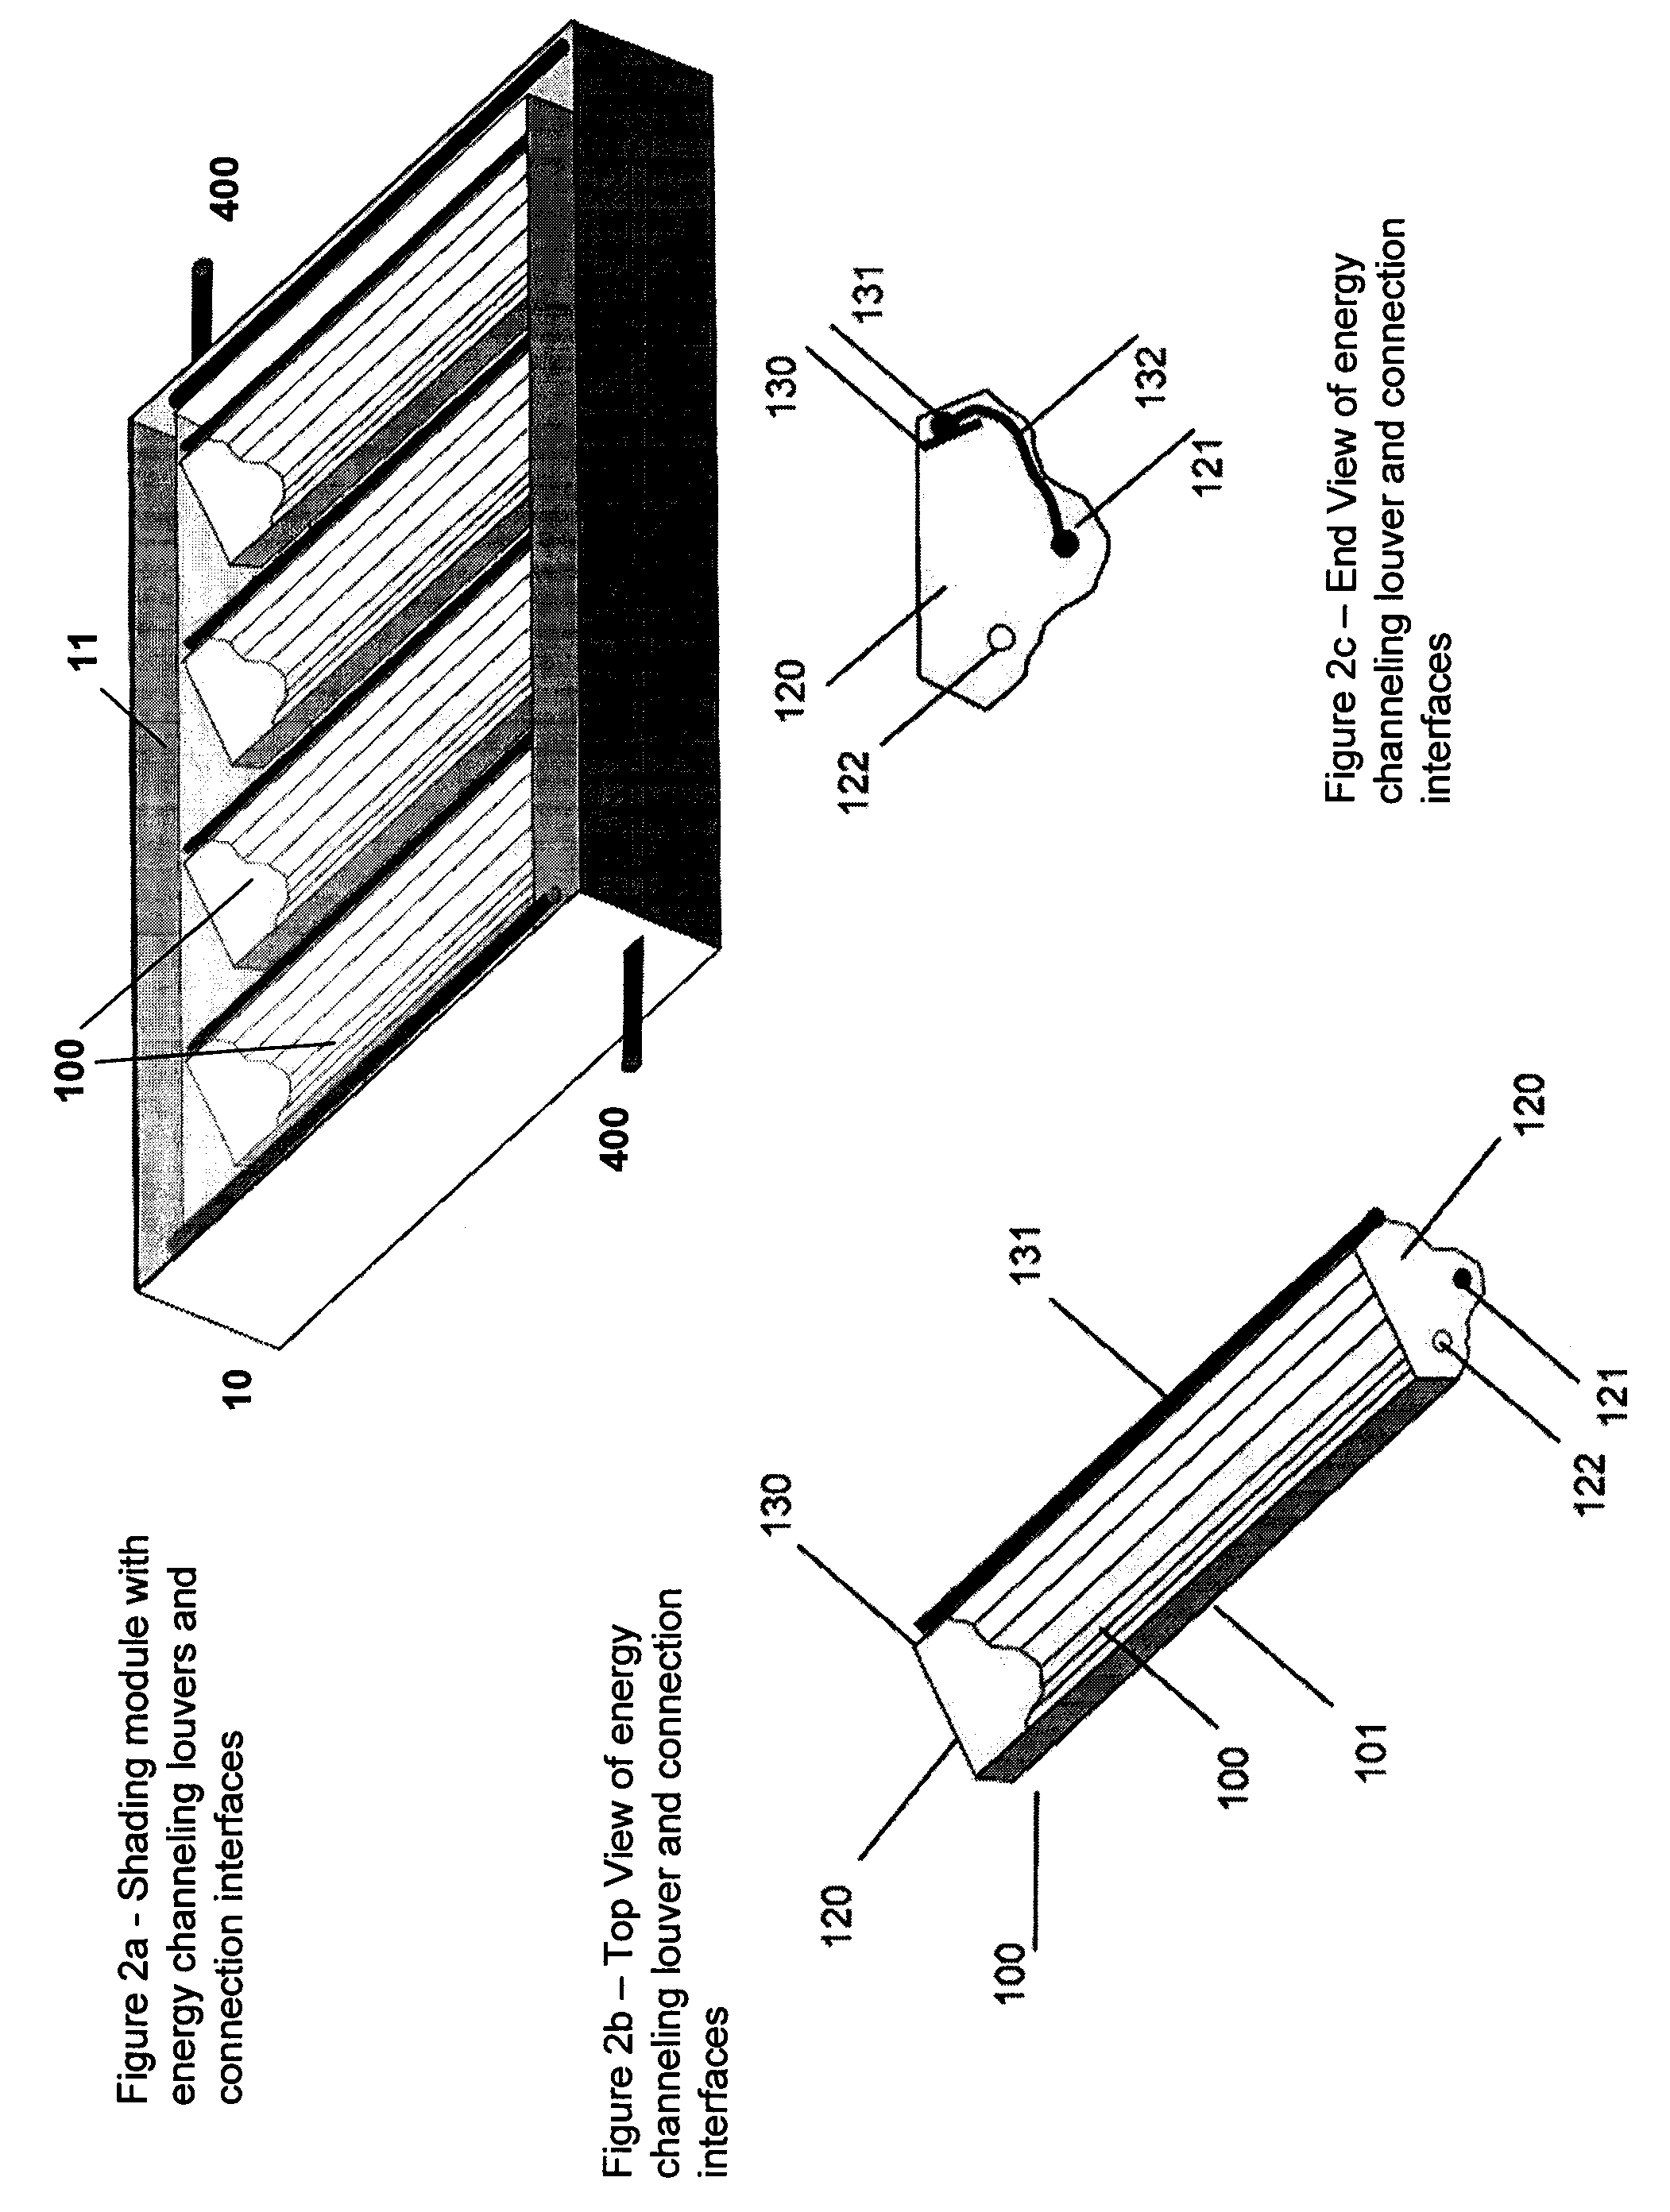 Energy Channeling Sun Shade System and Apparatus